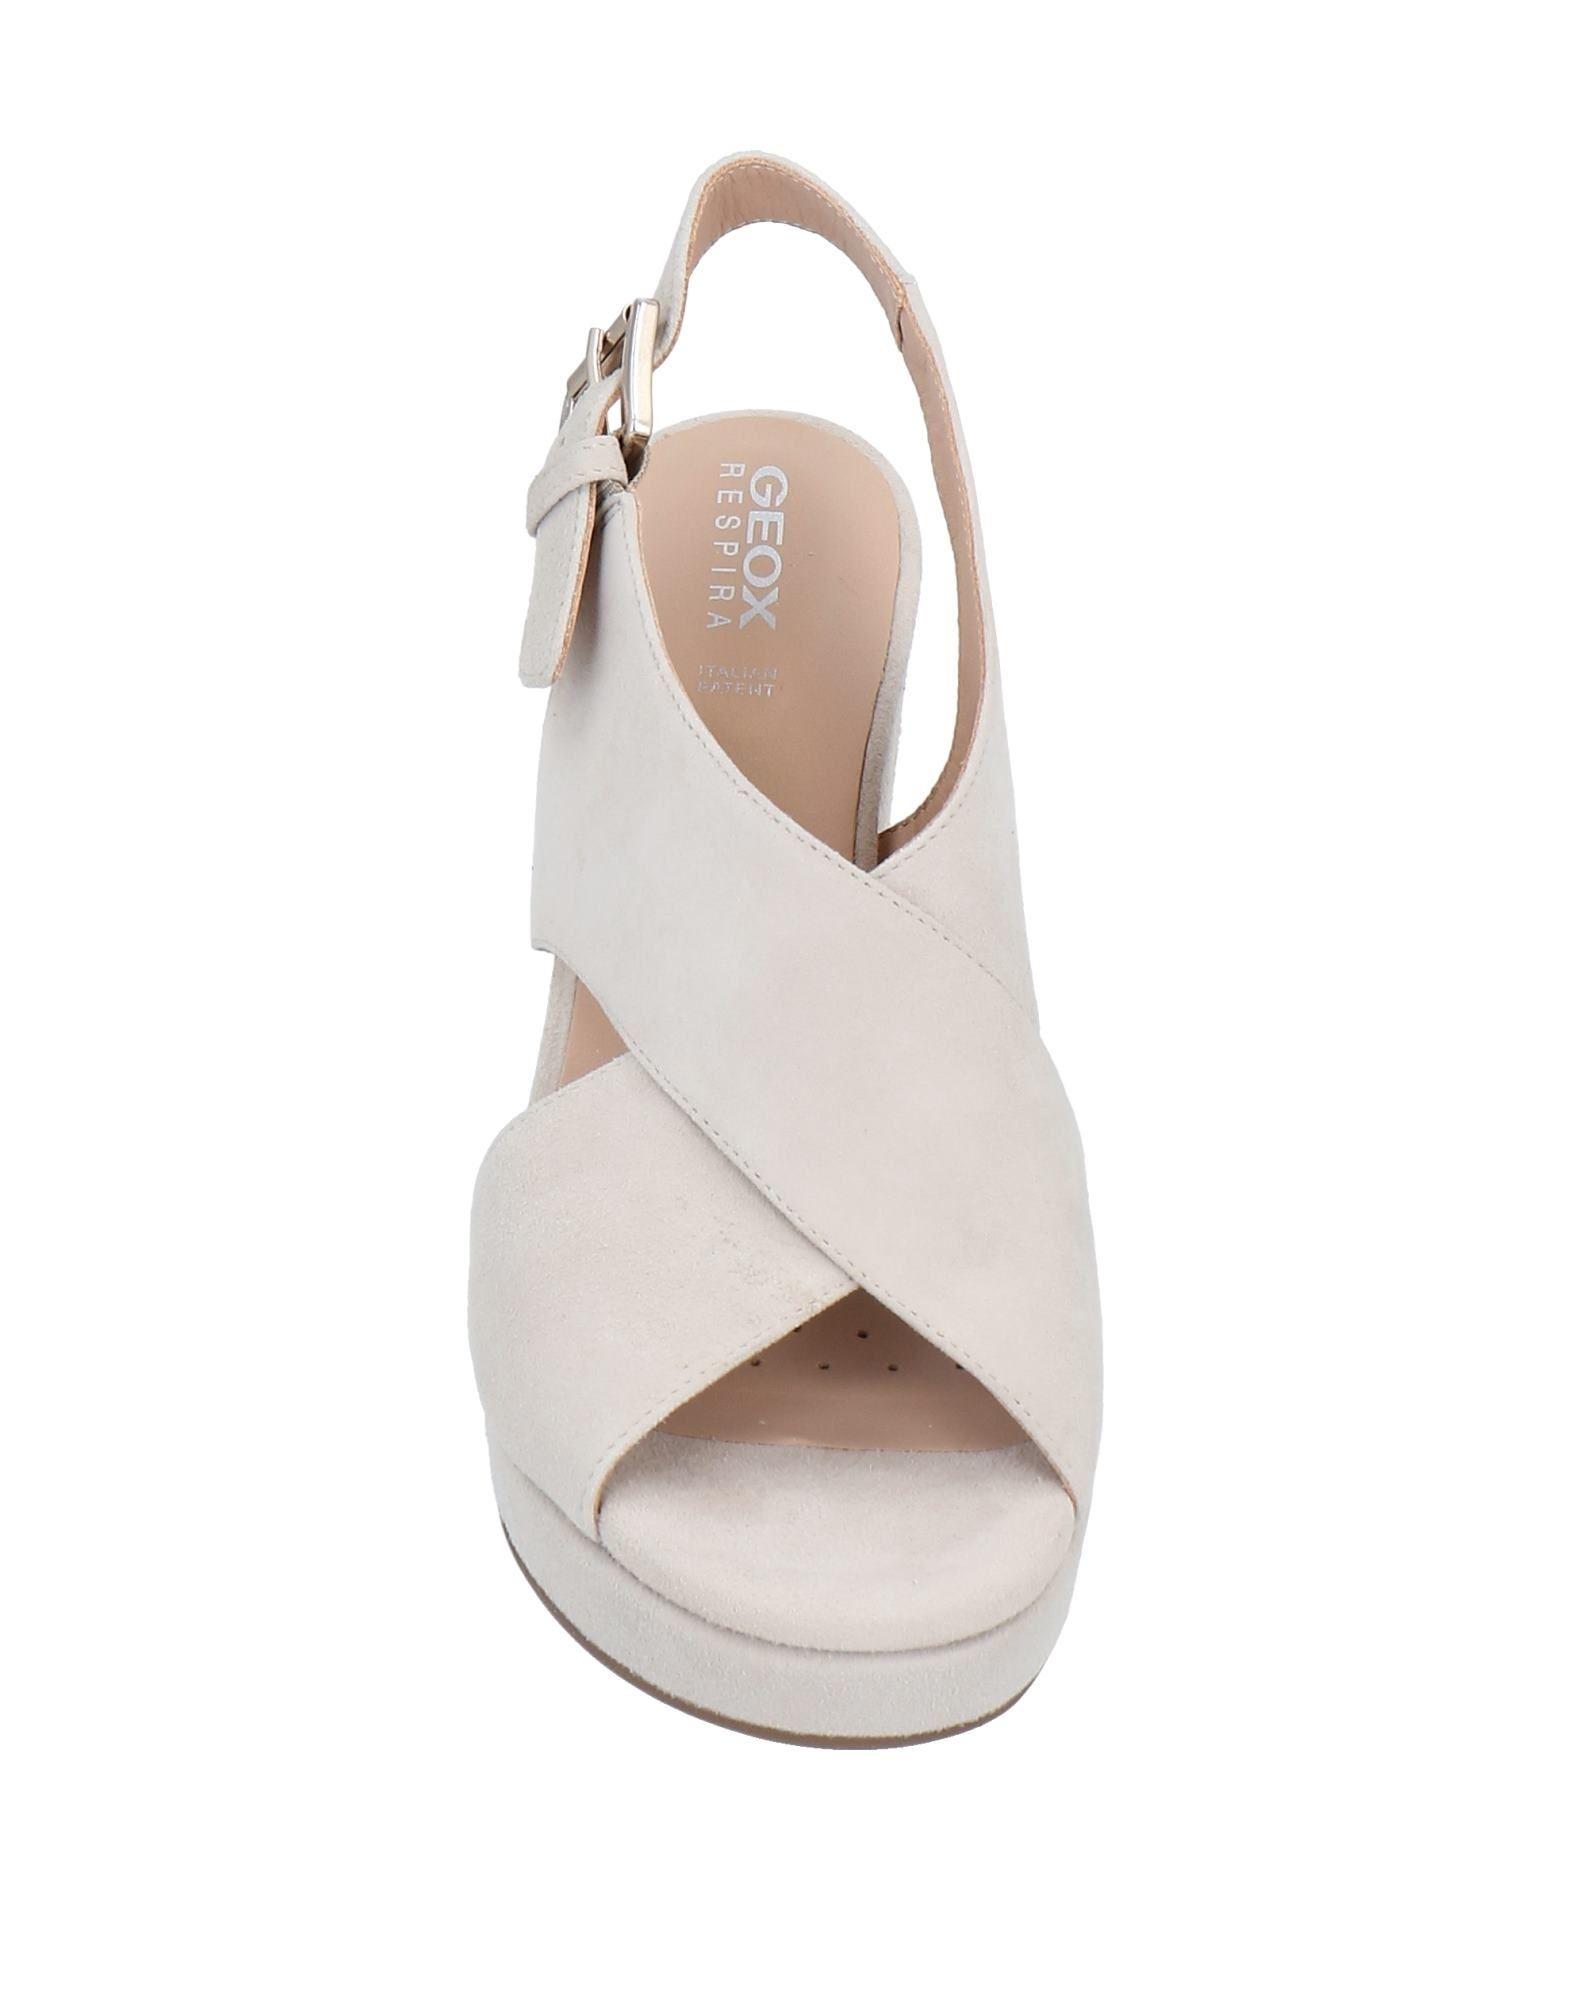 Geox Leather Sandals in Ivory (White) - Lyst